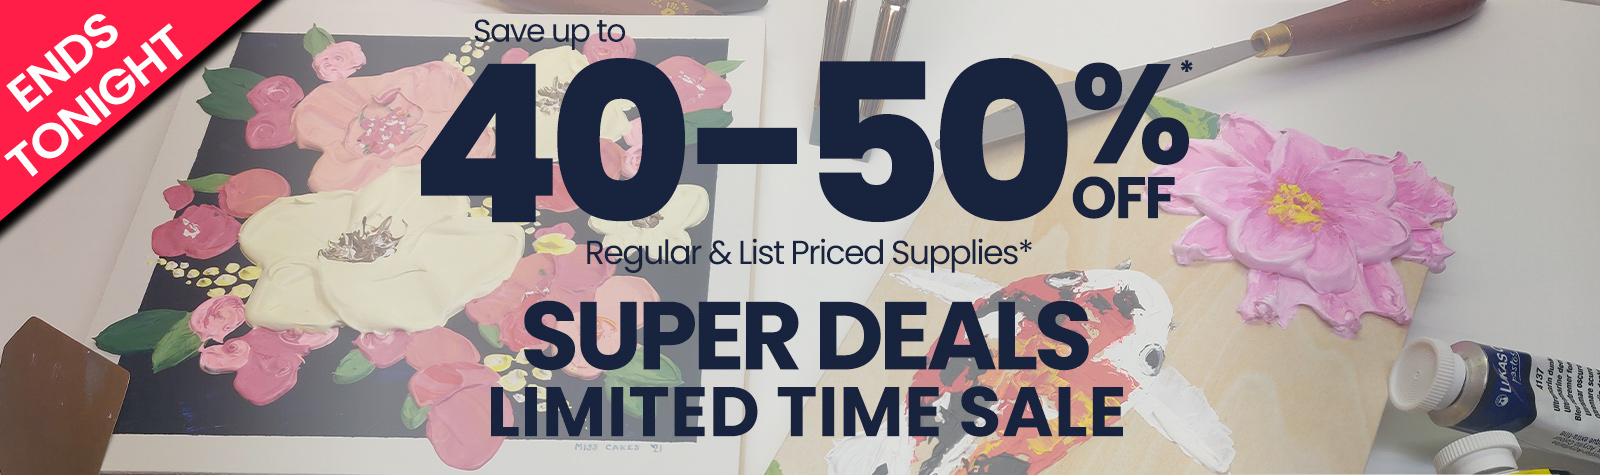 Save up to 50% Off Regular & List - Limited Time Sale